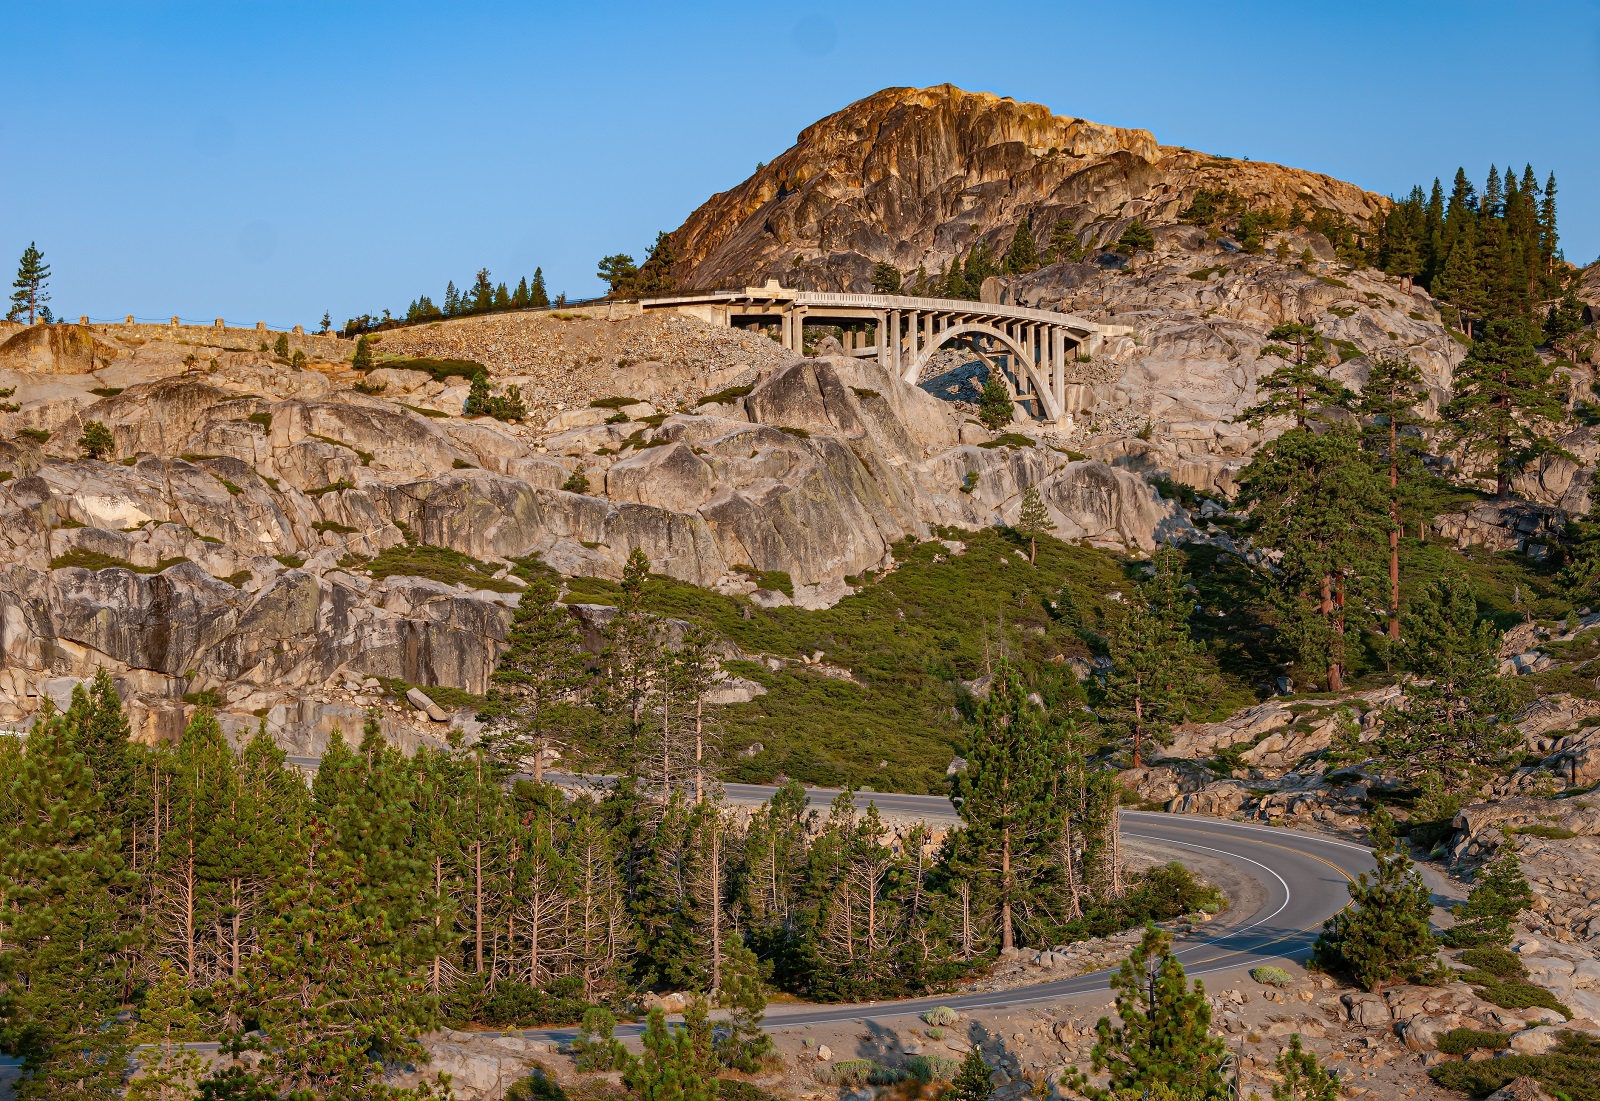 <p class="wp-caption-text">Image Credit: Shutterstock / Hank Erdmann</p>  <p><span>Spanning from Massachusetts to California, this historic route offers diverse landscapes. From the rocky shores of New England to the arid deserts of the West, it’s a comprehensive American road trip.</span></p>